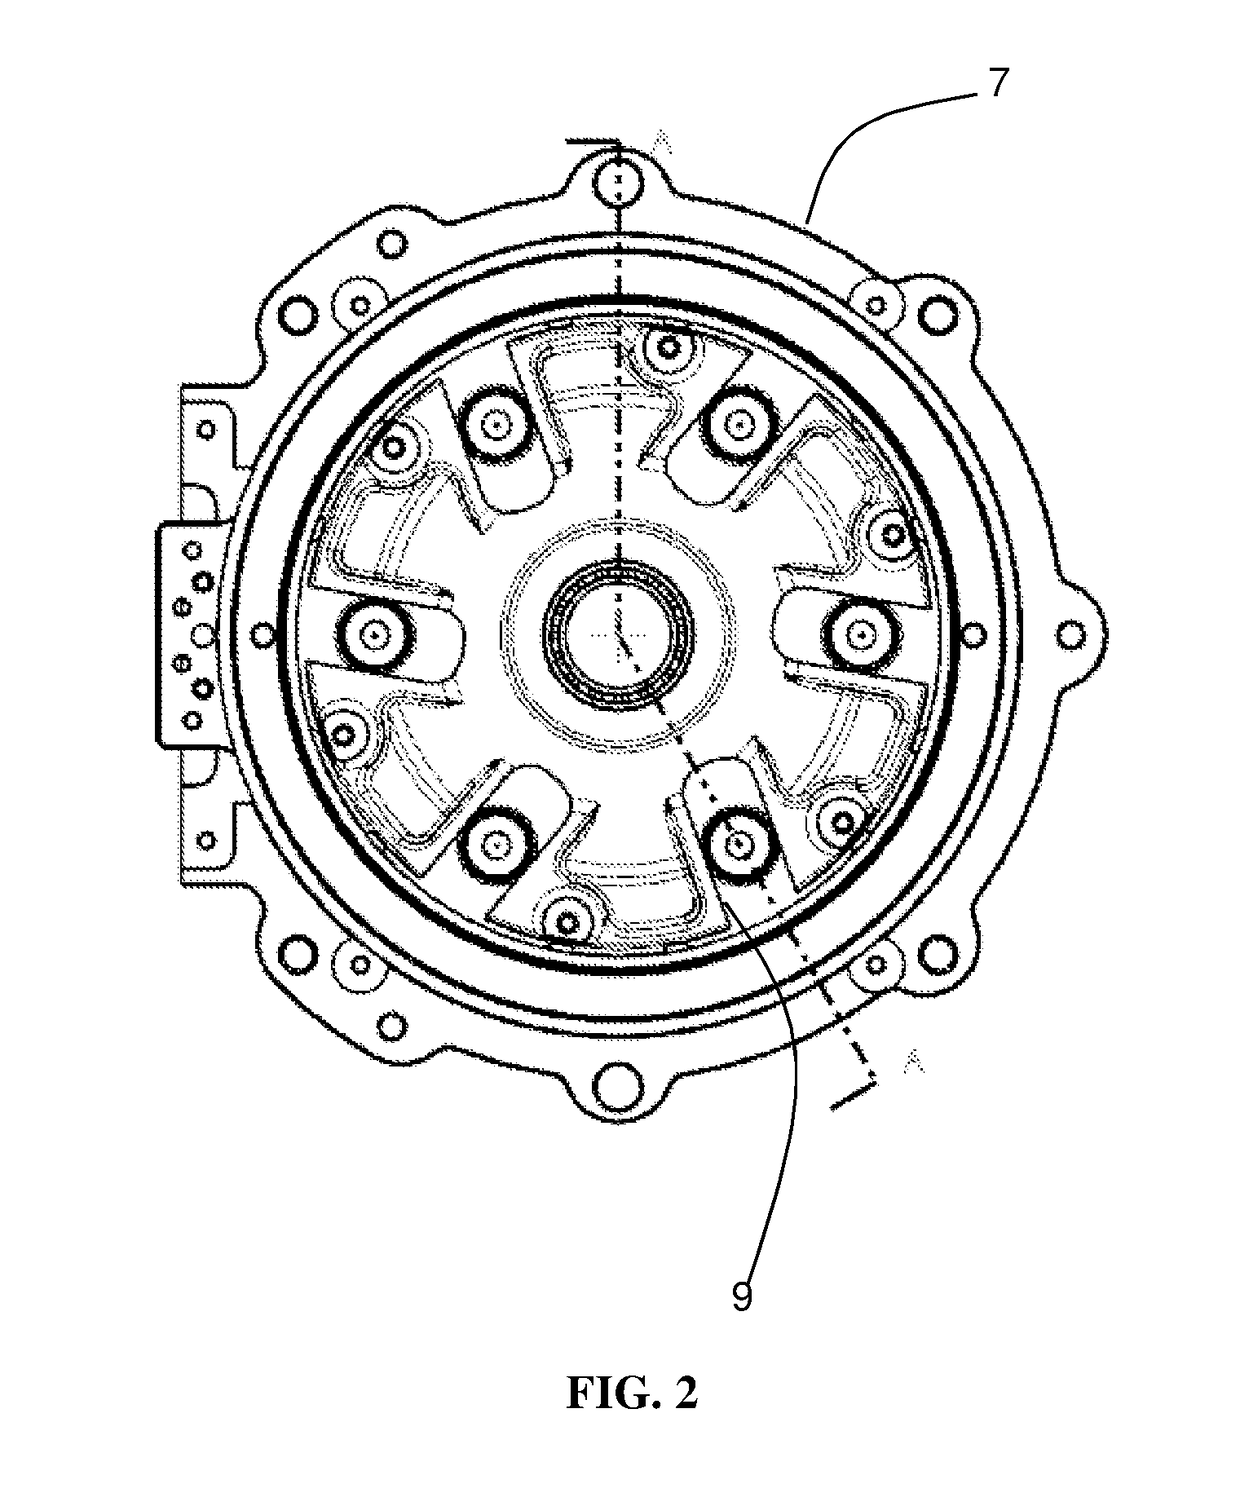 Abuse mode torque limiting control method for a ball-type continuously variable transmission